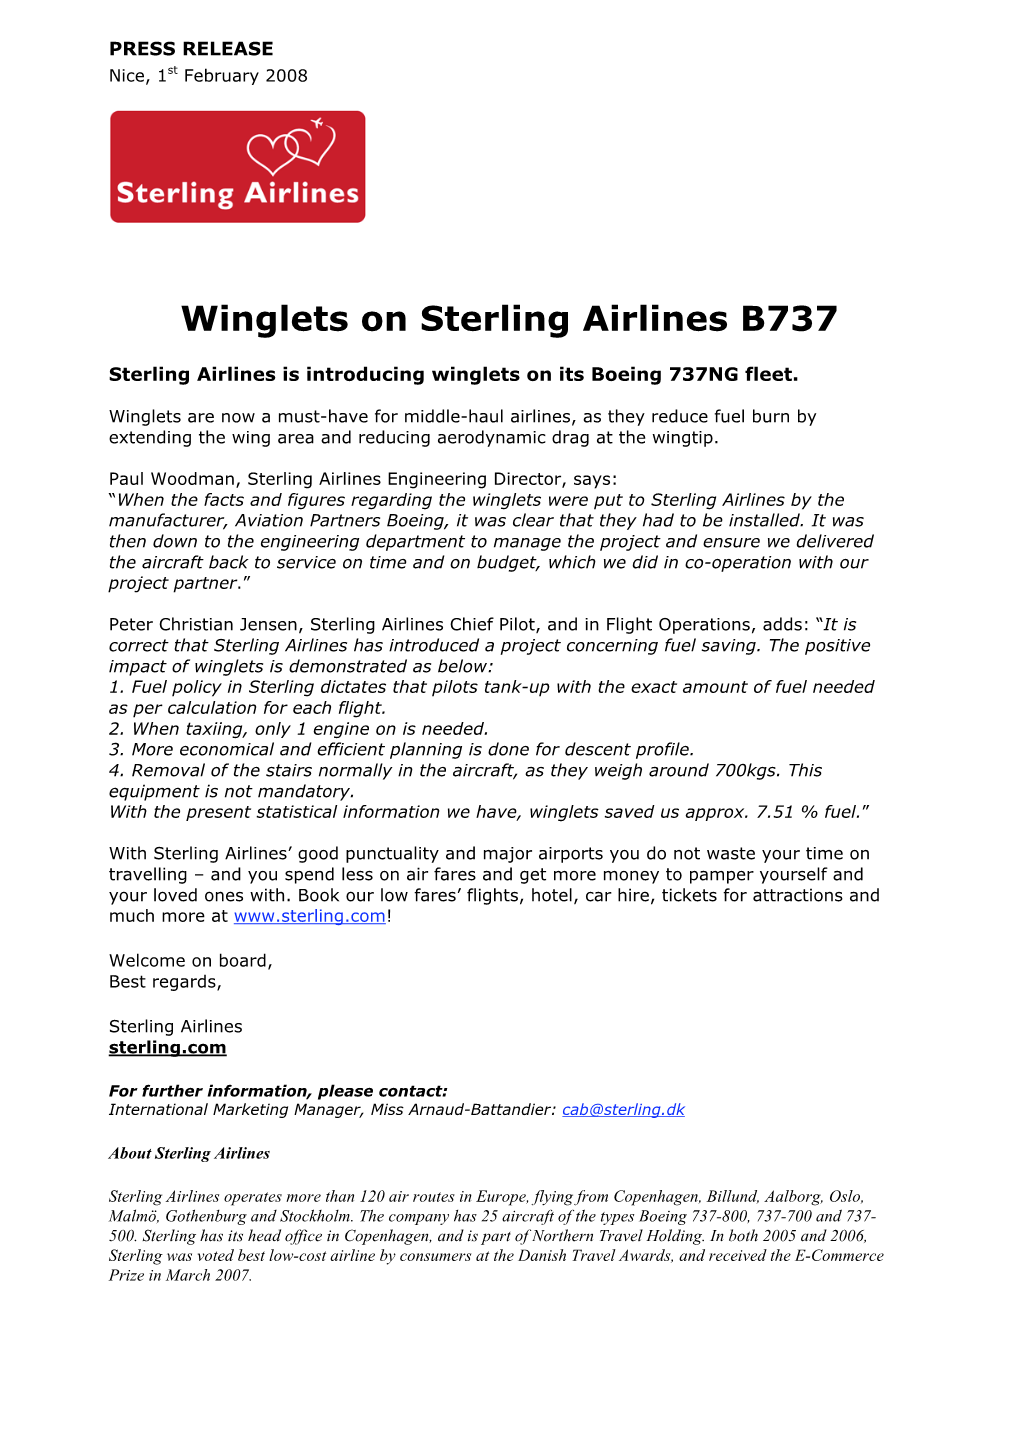 Winglets on Sterling Airlines B737